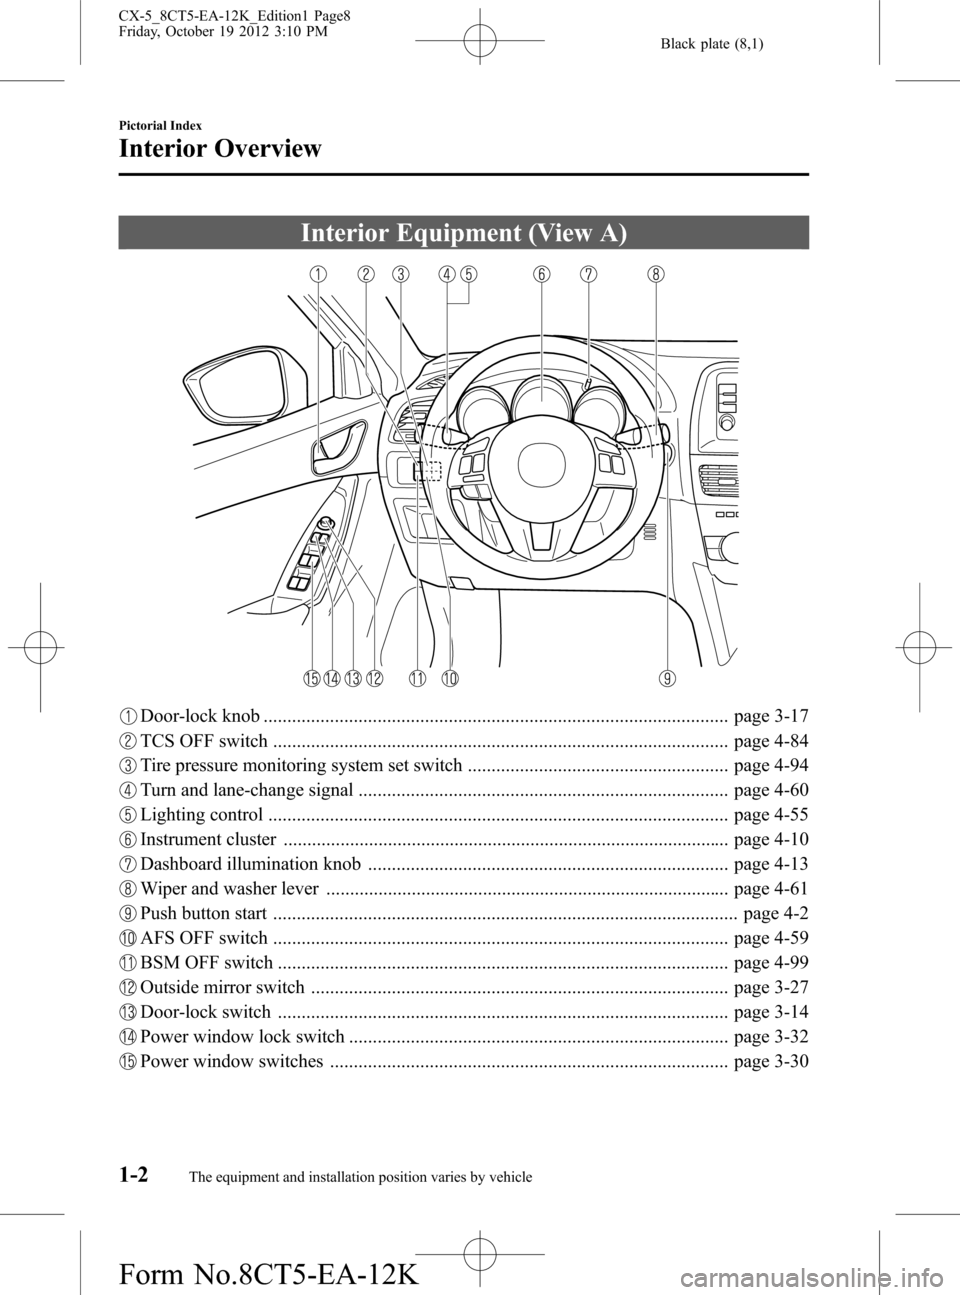 MAZDA MODEL CX-5 2014  Owners Manual (in English) Black plate (8,1)
Interior Equipment (View A)
Door-lock knob .................................................................................................. page 3-17
TCS OFF switch ...............